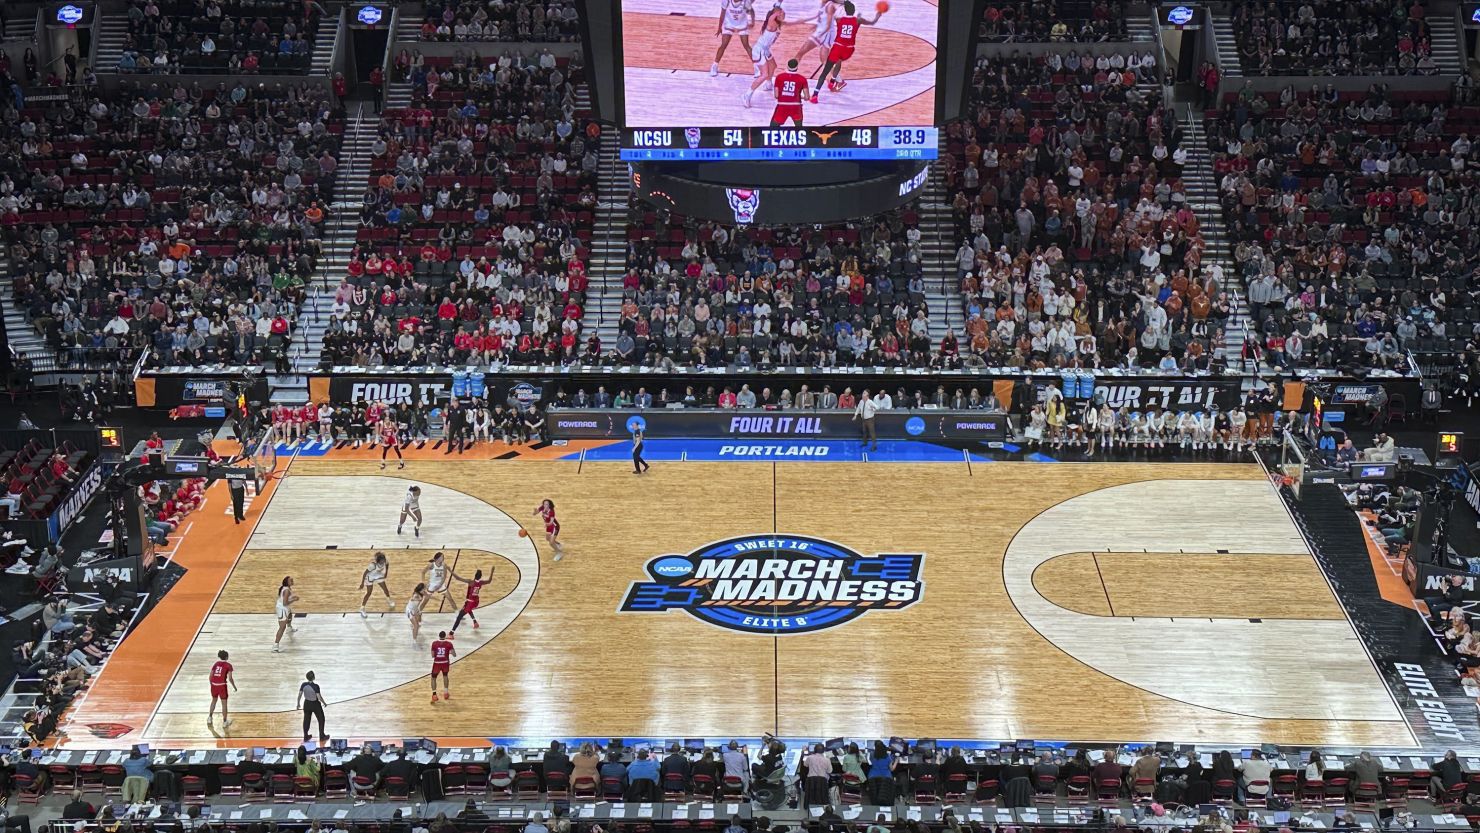 The NCAA acknowledged the unusual discrepancy during halftime.